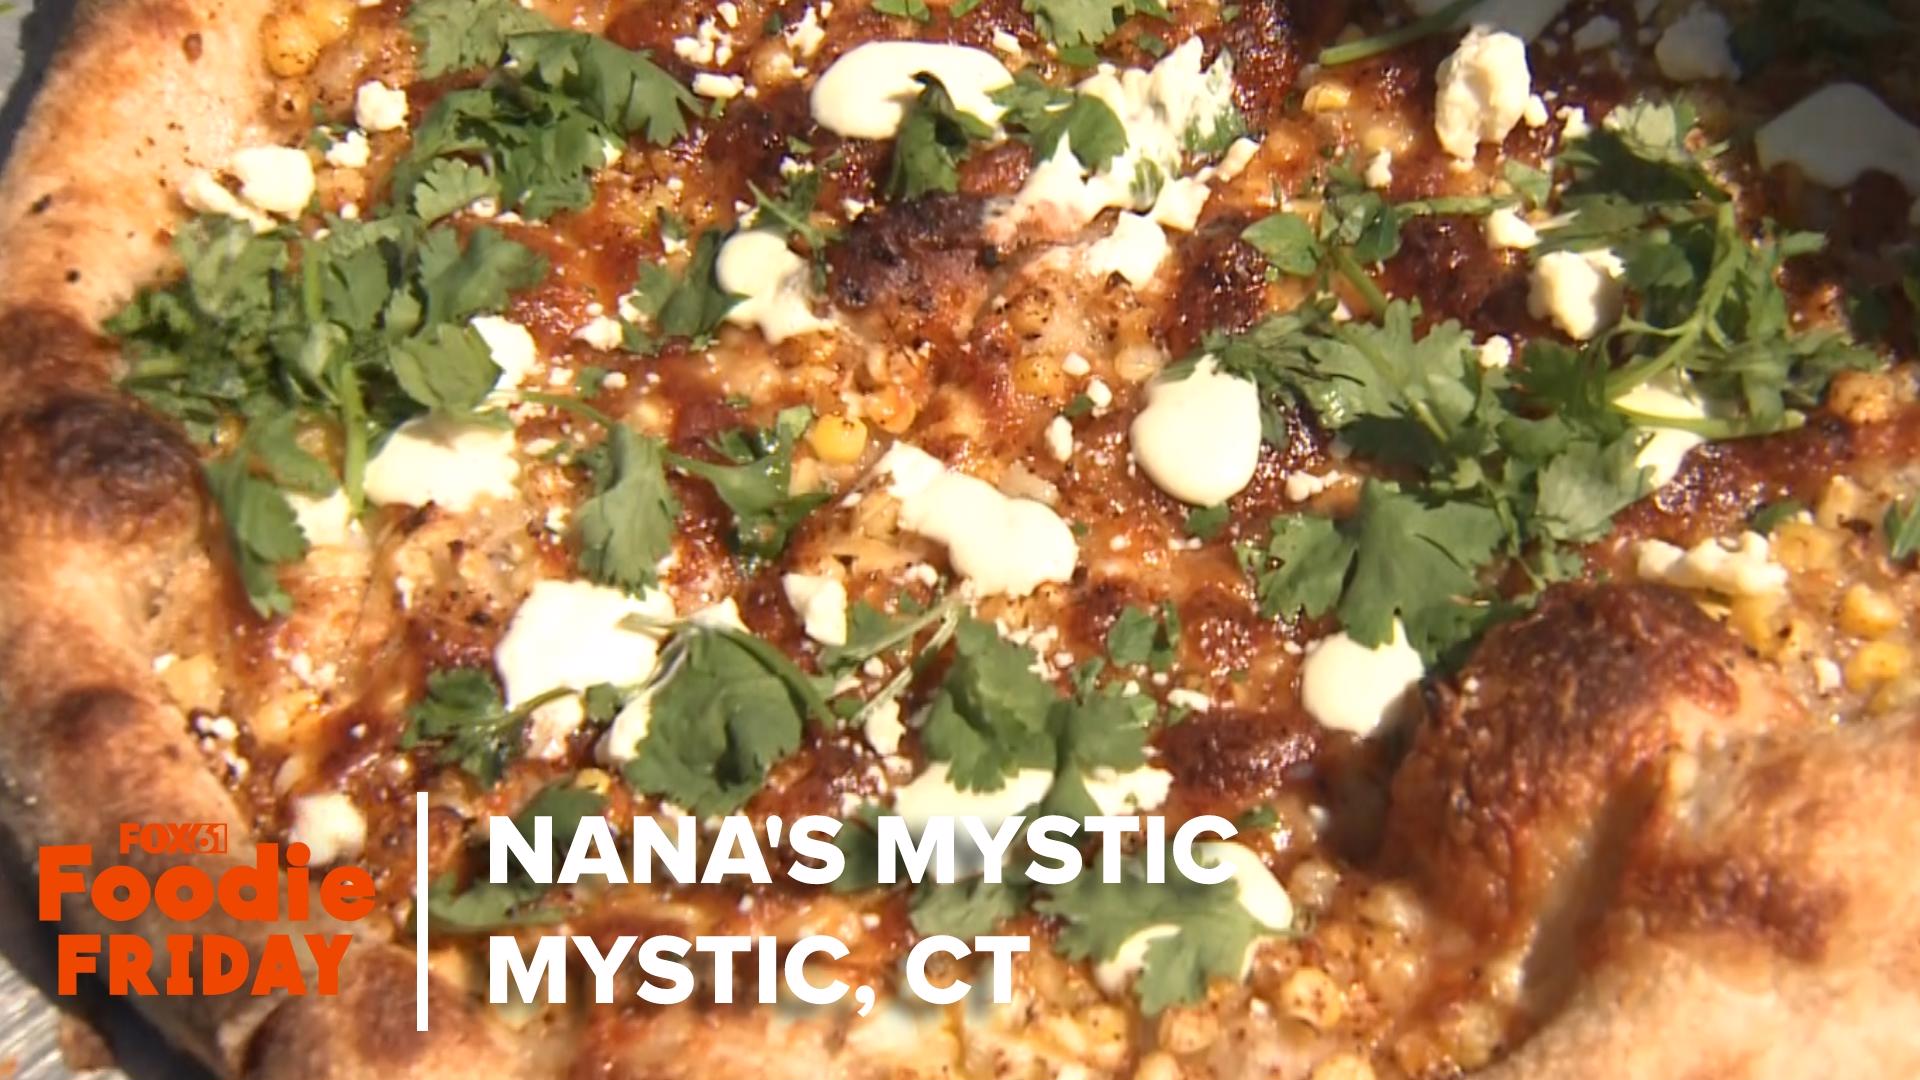 FOX61's Matt Scott visited Nana's Mystic for Foodie Friday to sample baked goods and pizza they offer, which are made from natural and organic ingredients.